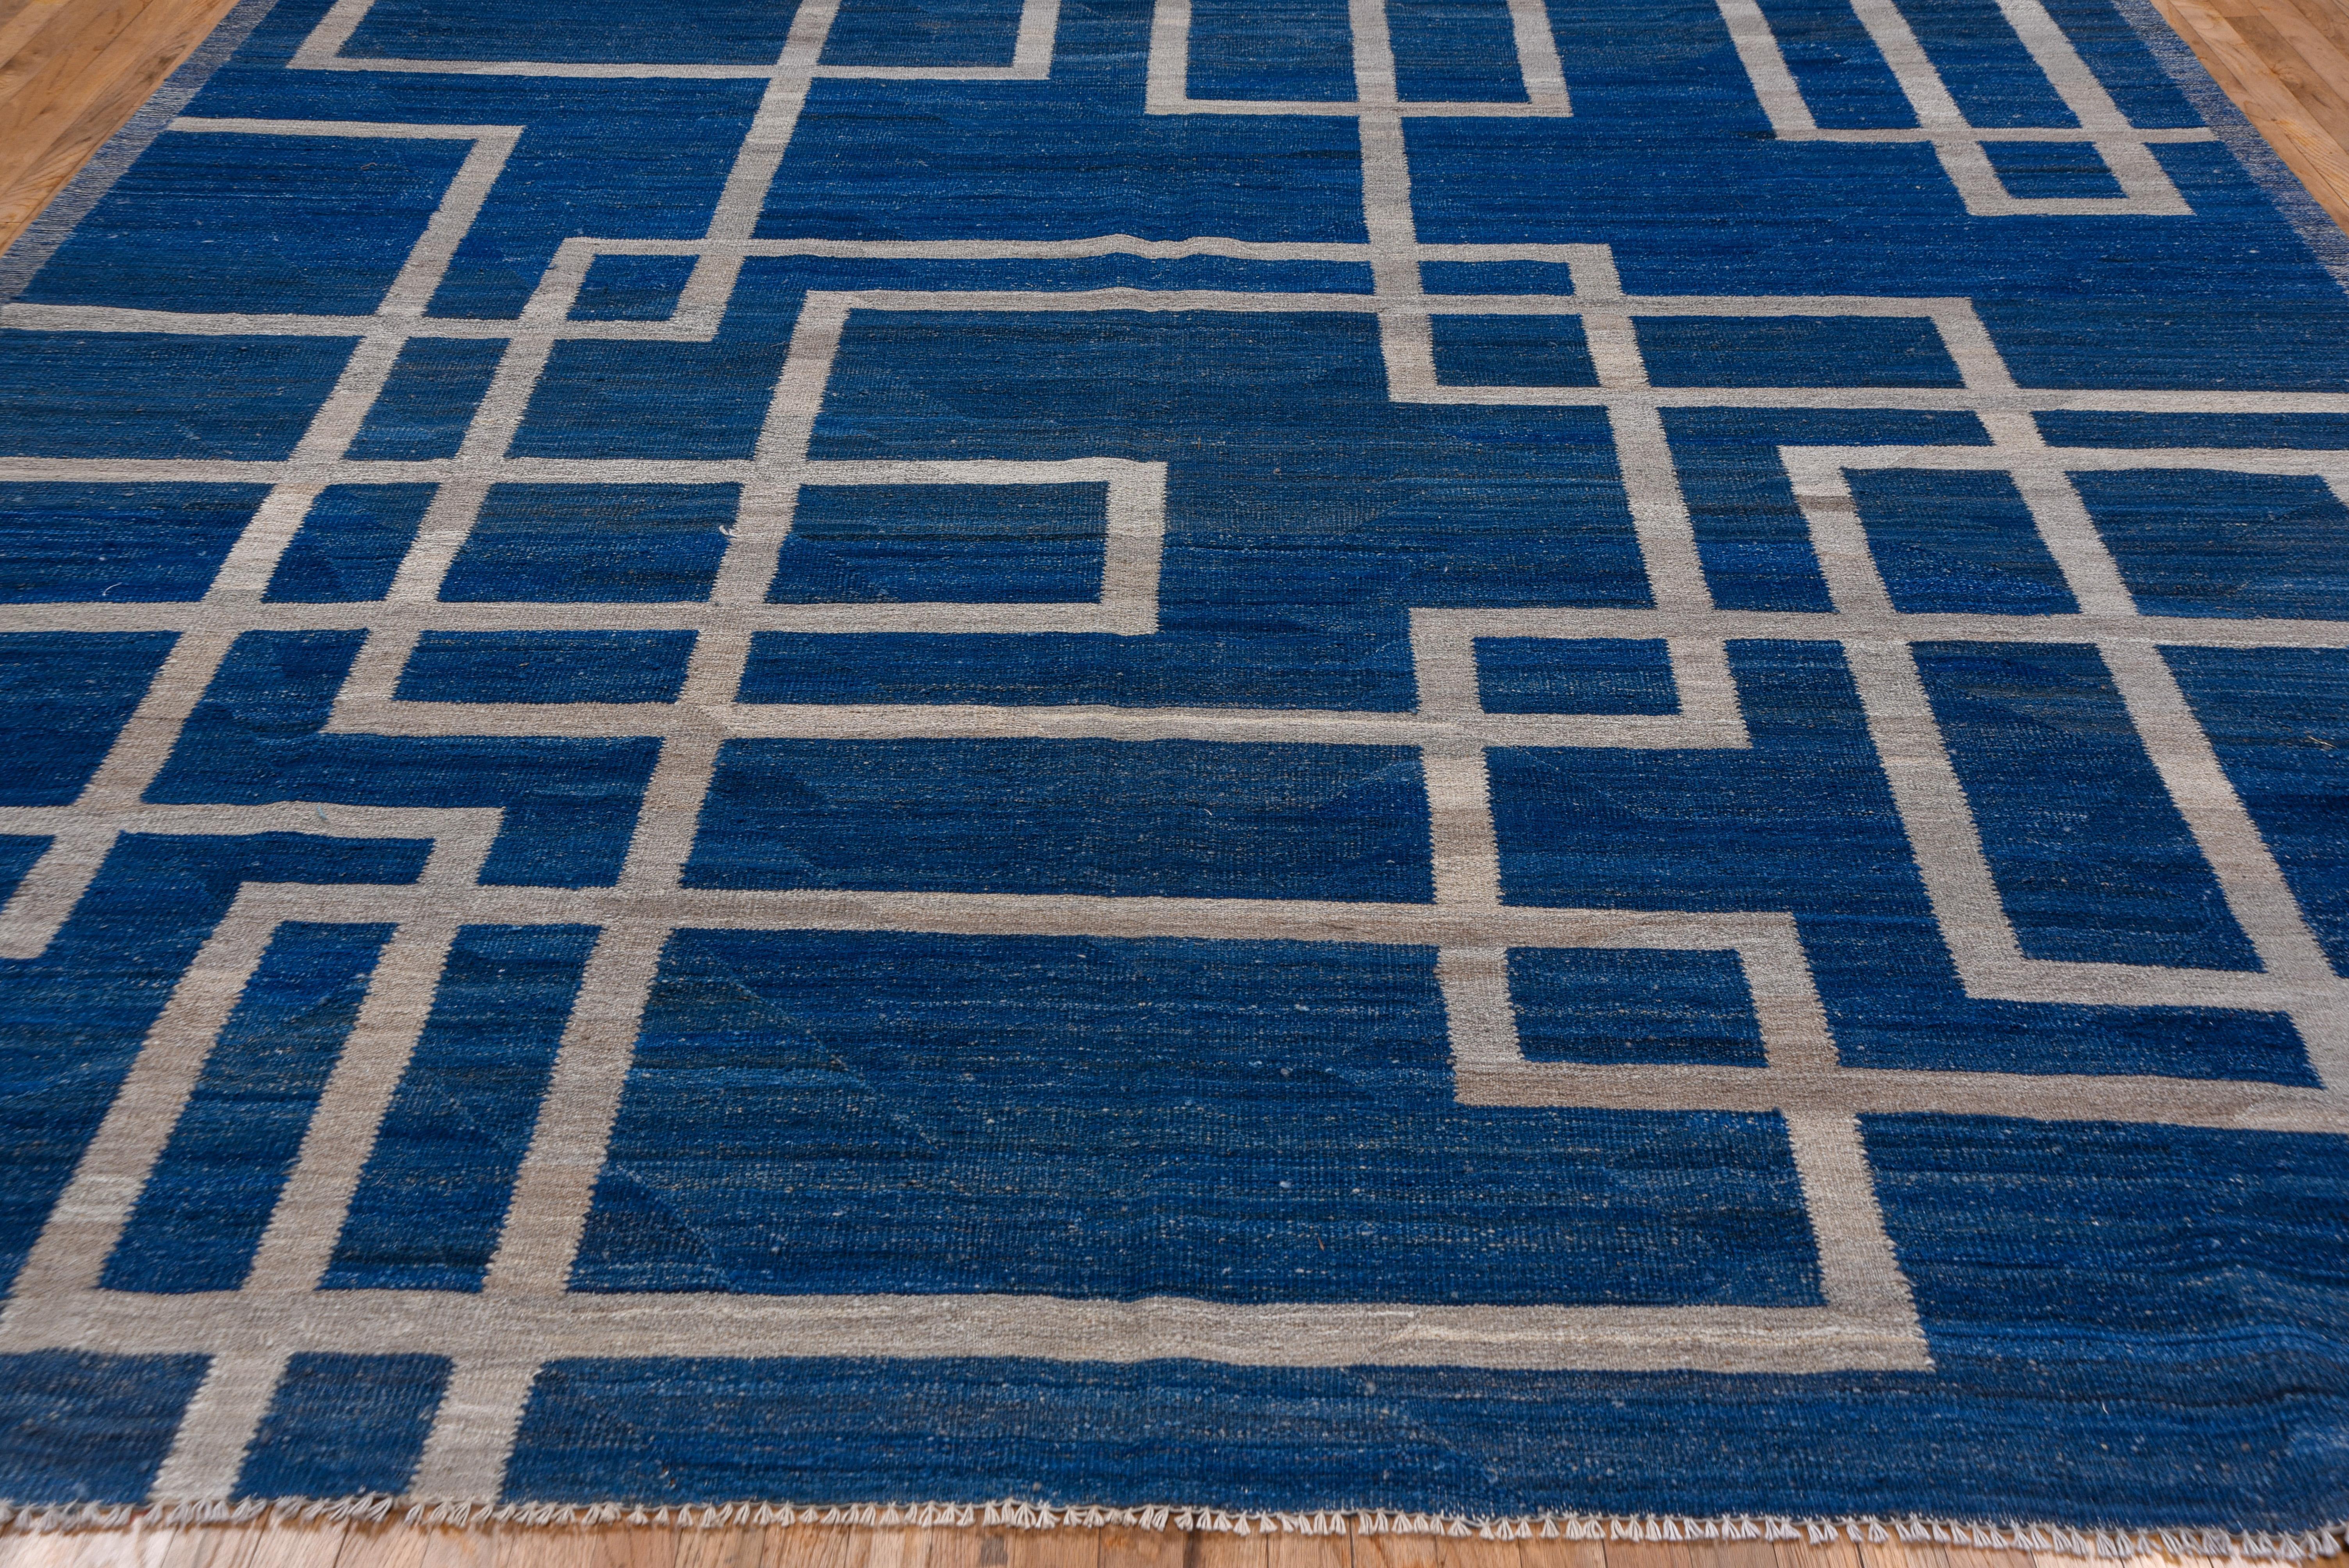 Modern & Geometric Royal Blue Flatweave Rug with Gray & Taupe Accents In Excellent Condition For Sale In New York, NY